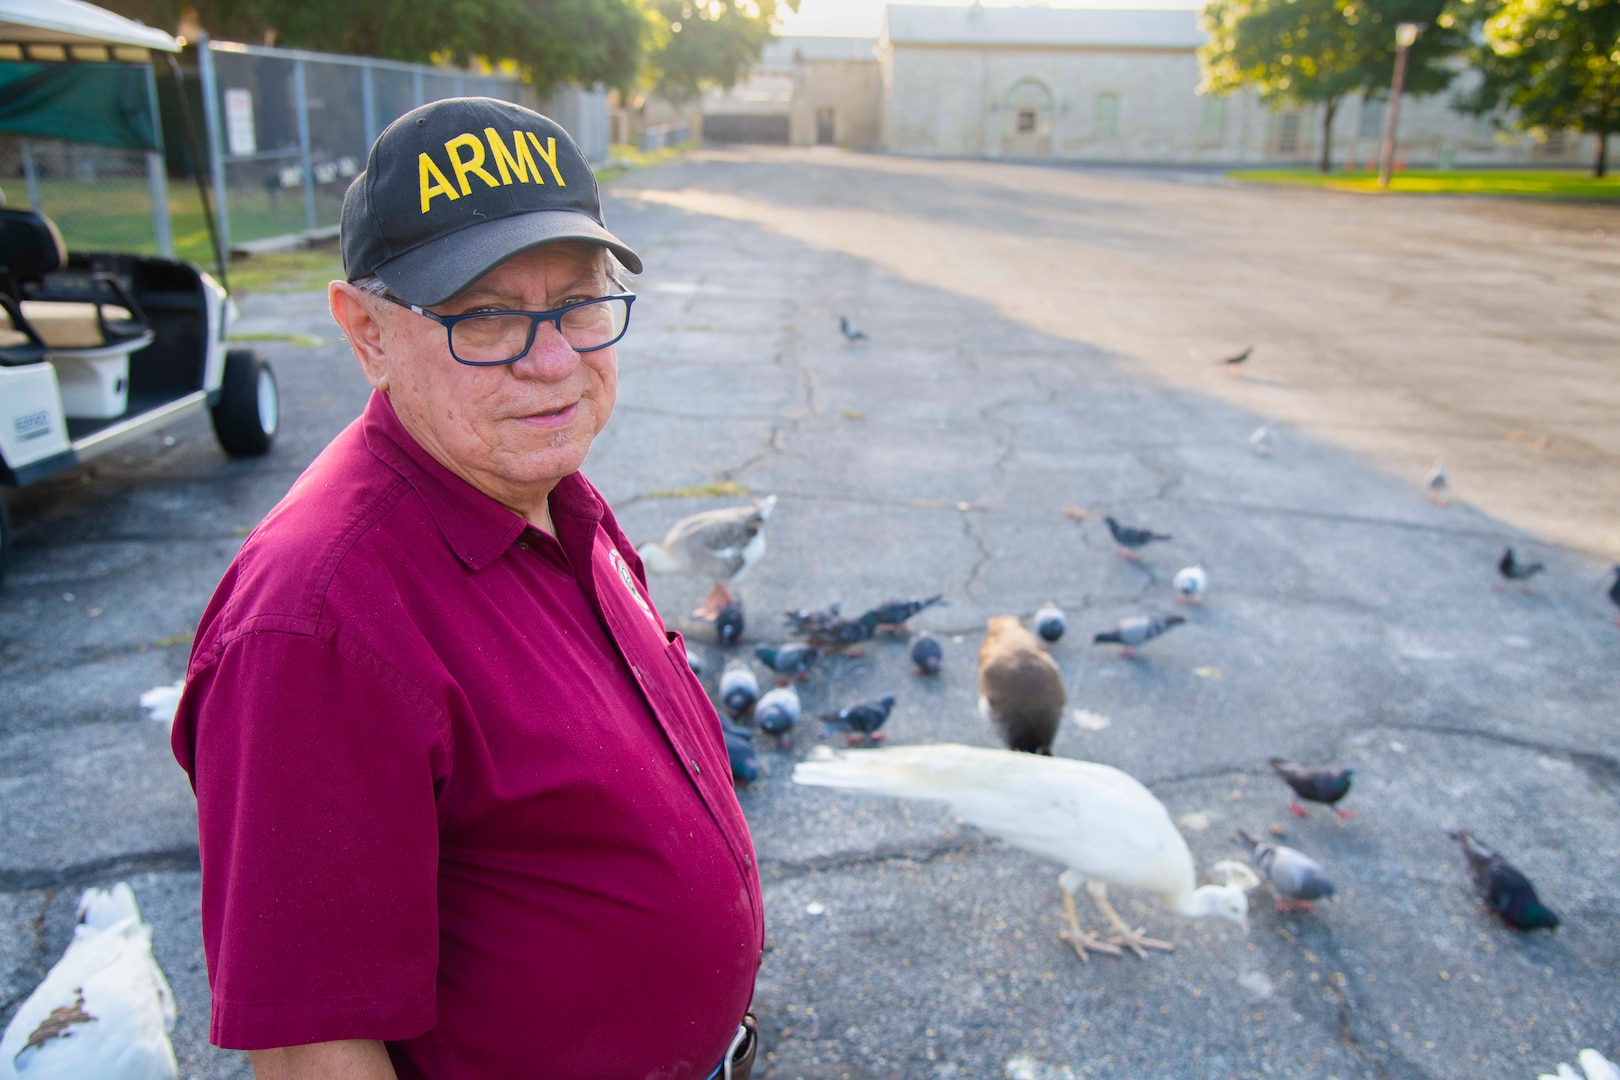 Adam Quintero, caretaker of the animals in the U.S. Army North Quadrangle, retires with more than 50 years of service to his country July 31, 2020.